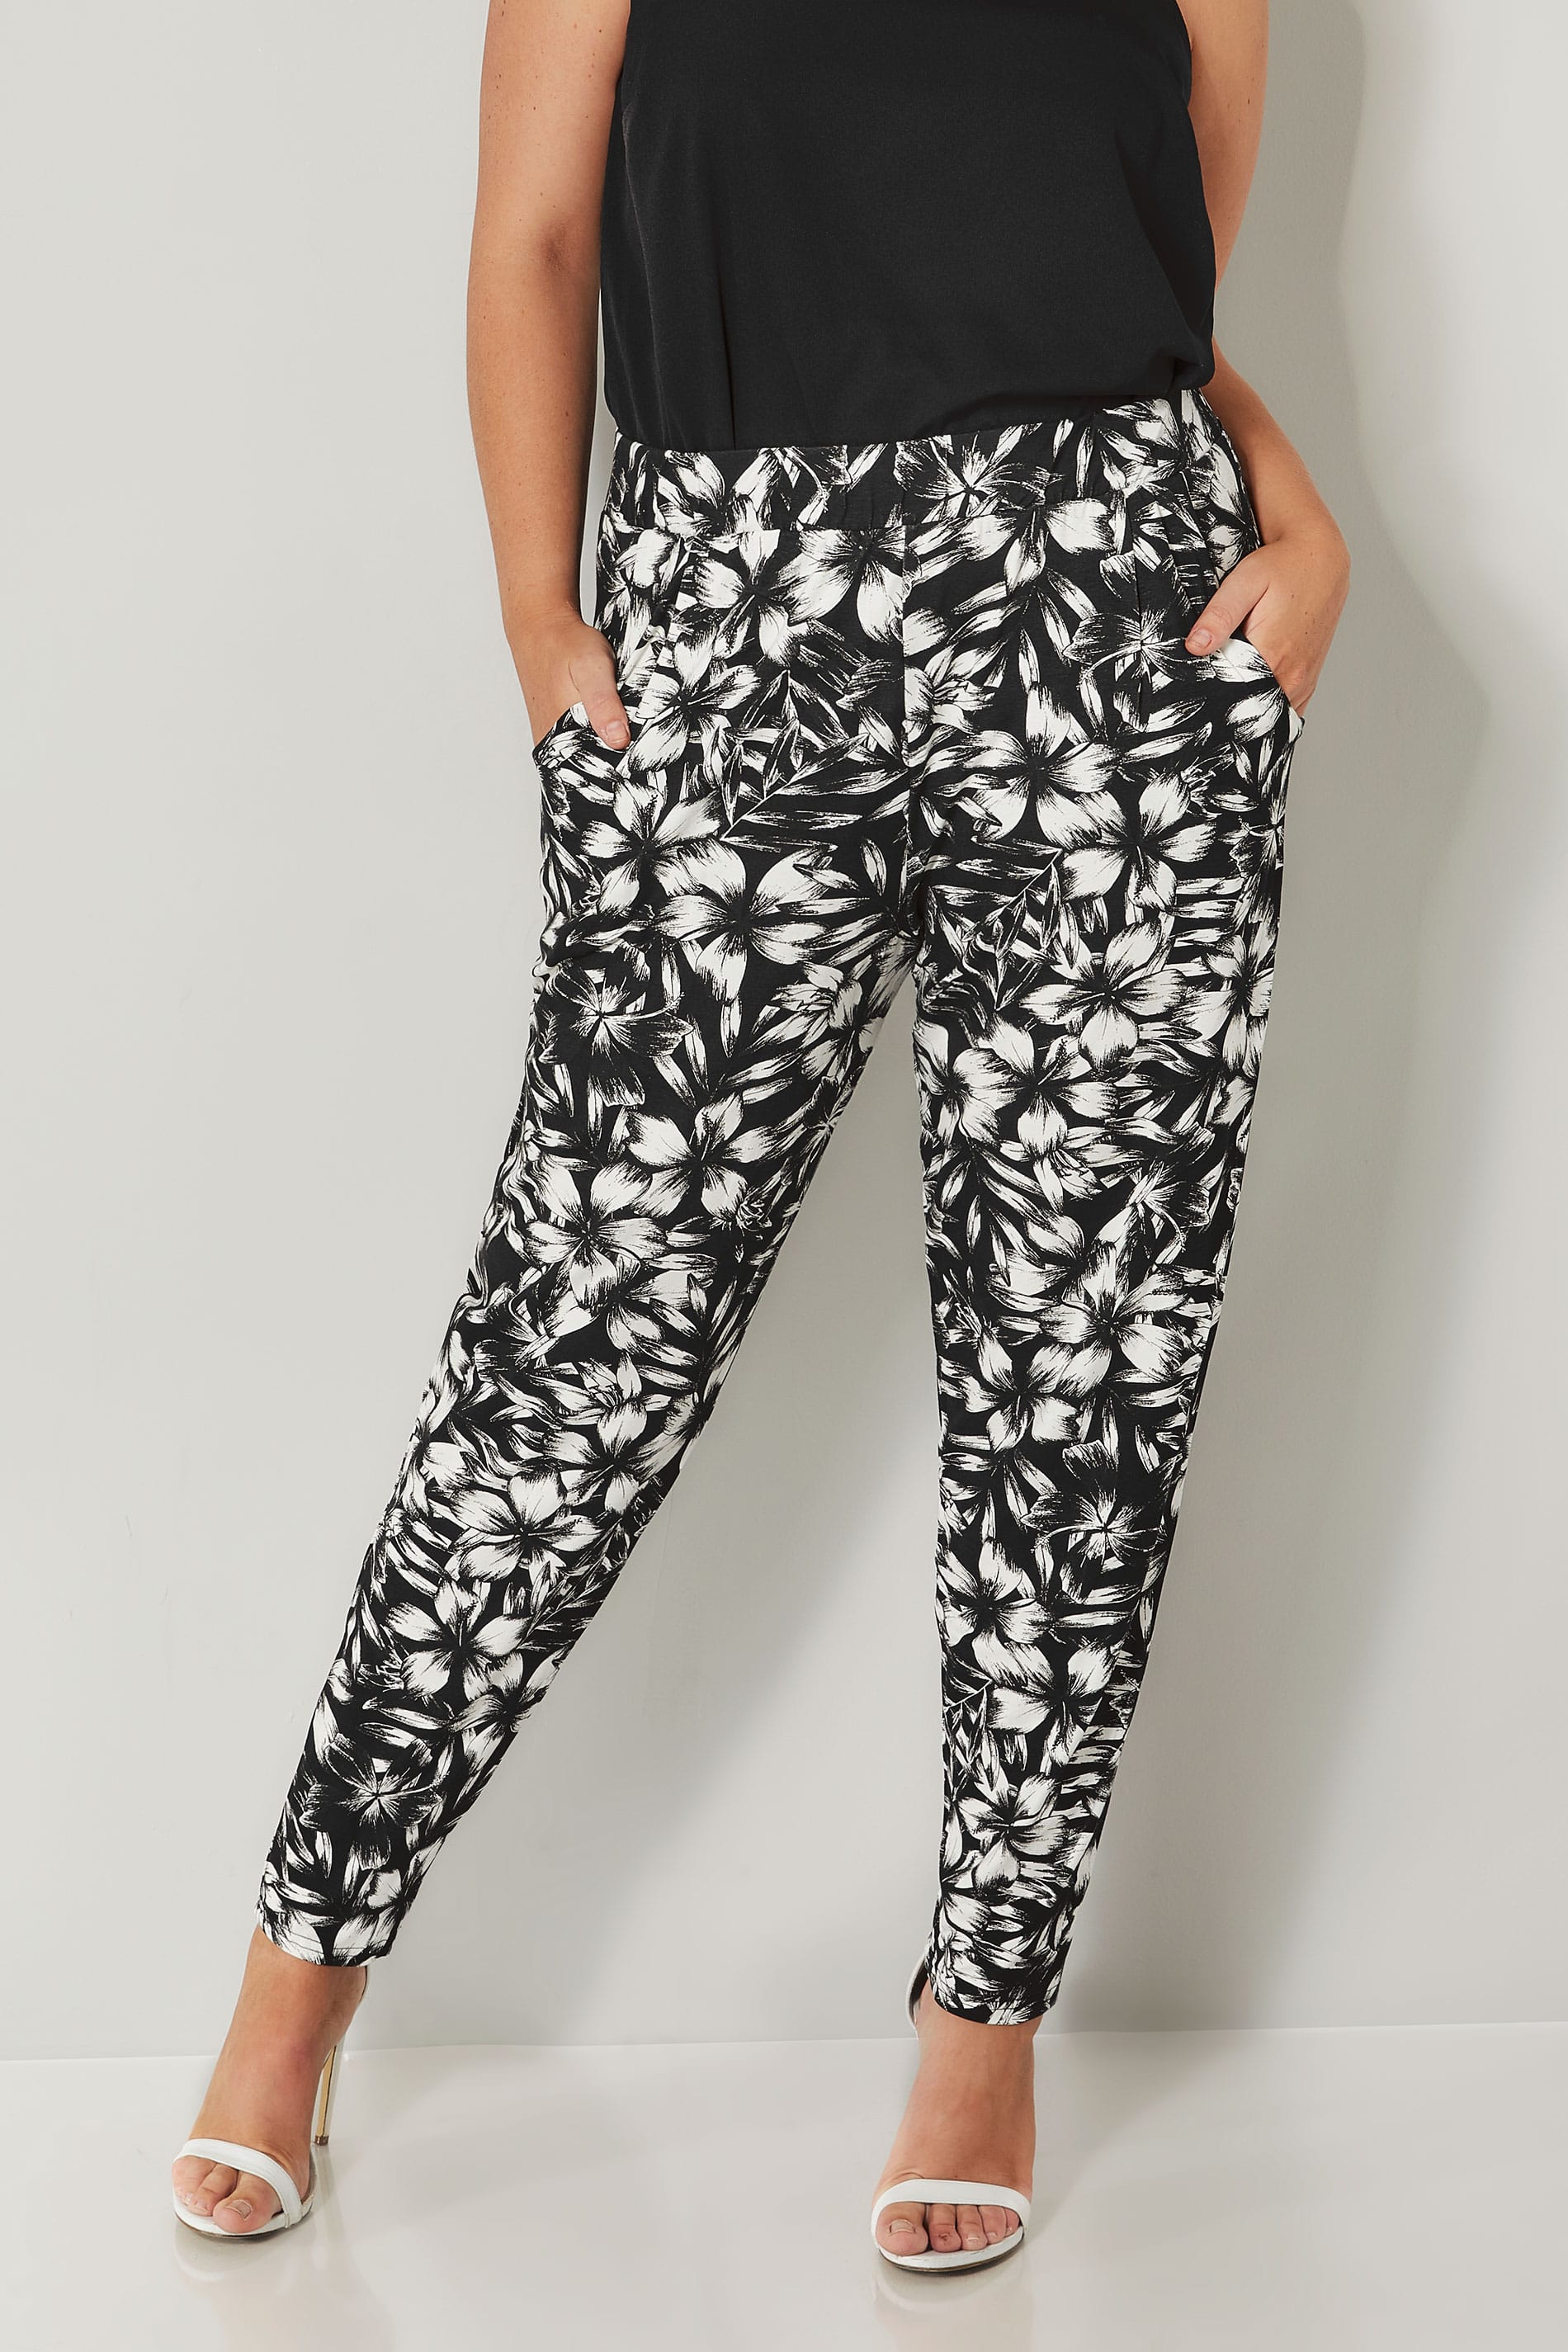 Black & White Floral Harem Trousers, plus size 16 to 36 | Yours Clothing